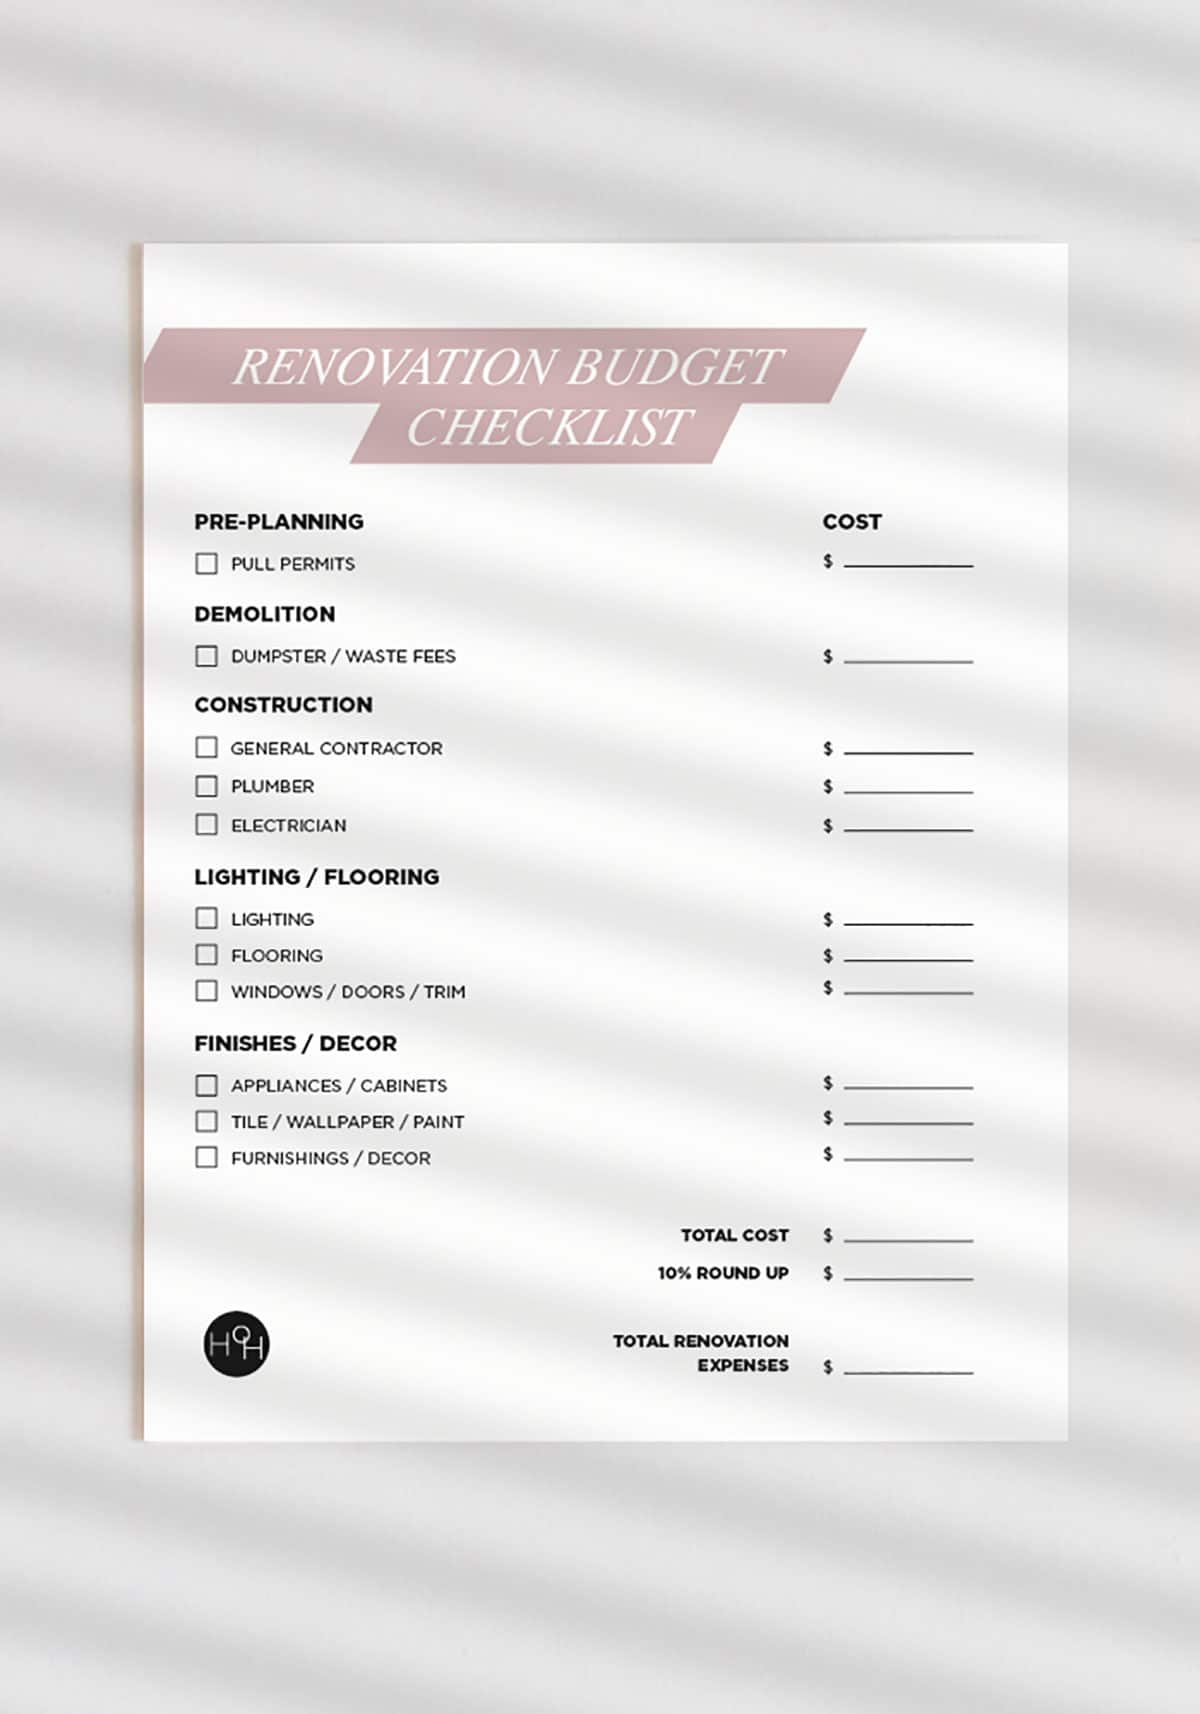 Download this free renovation checklist and keep your project on budget.